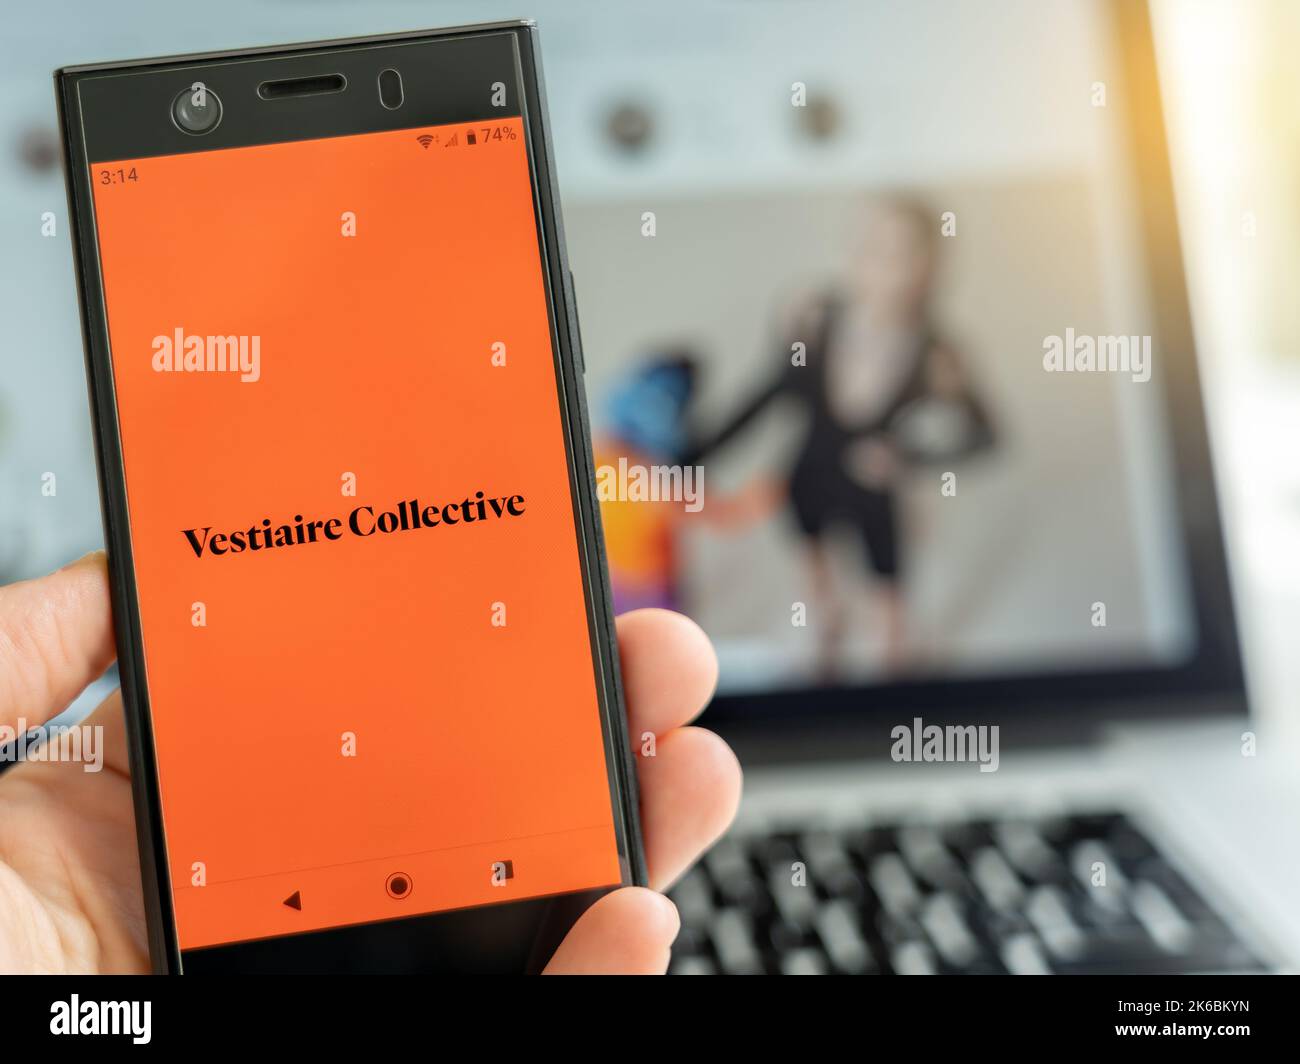 Milan, Italy - 10 13 2022: Installing Vestiaire Collective app for smartphone. Stock Photo